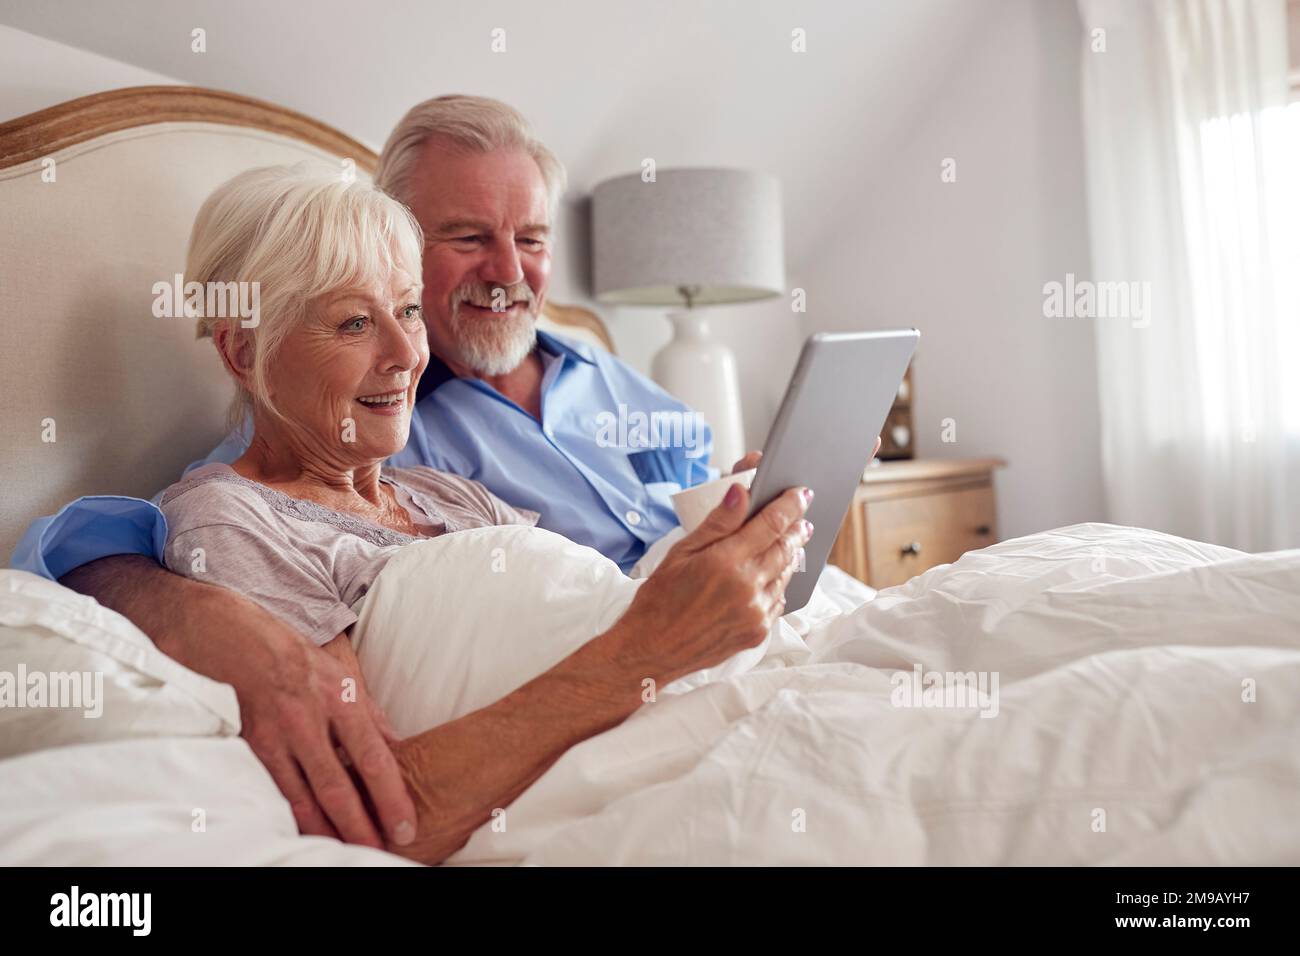 Retired Senior Couple In Bed At Home Using Digital Tablet Stock Photo